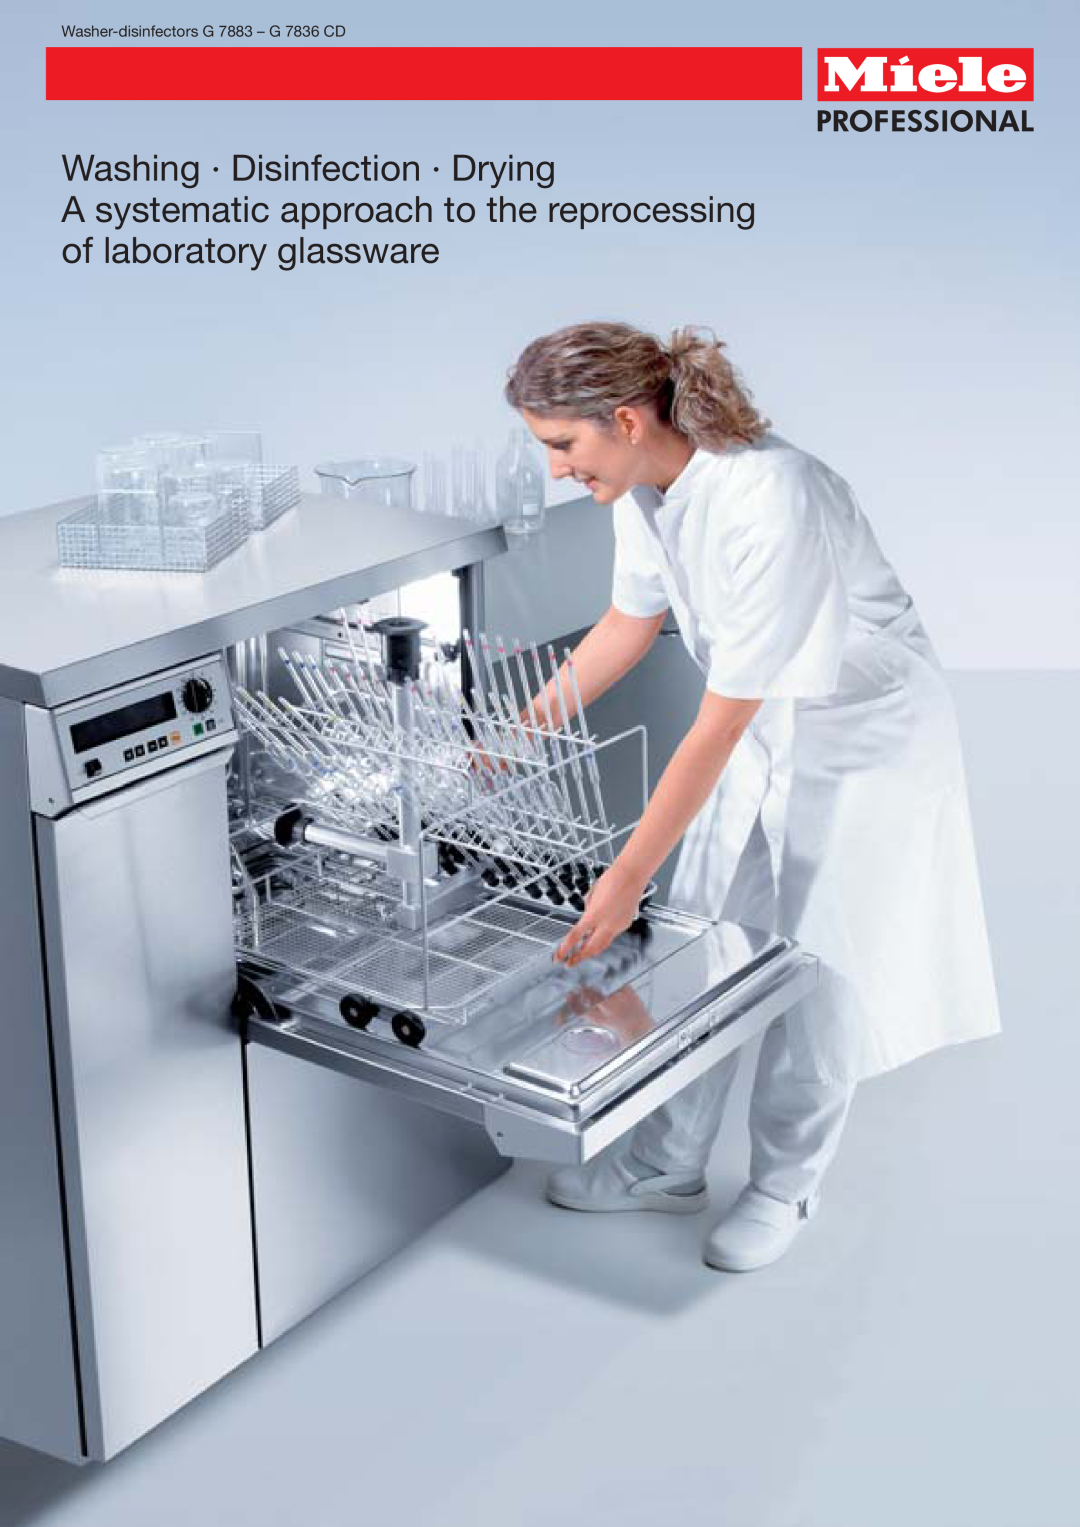 Miele manual Washing · Disinfection · Drying, Washer-disinfectorsG 7883 – G 7836 CD 